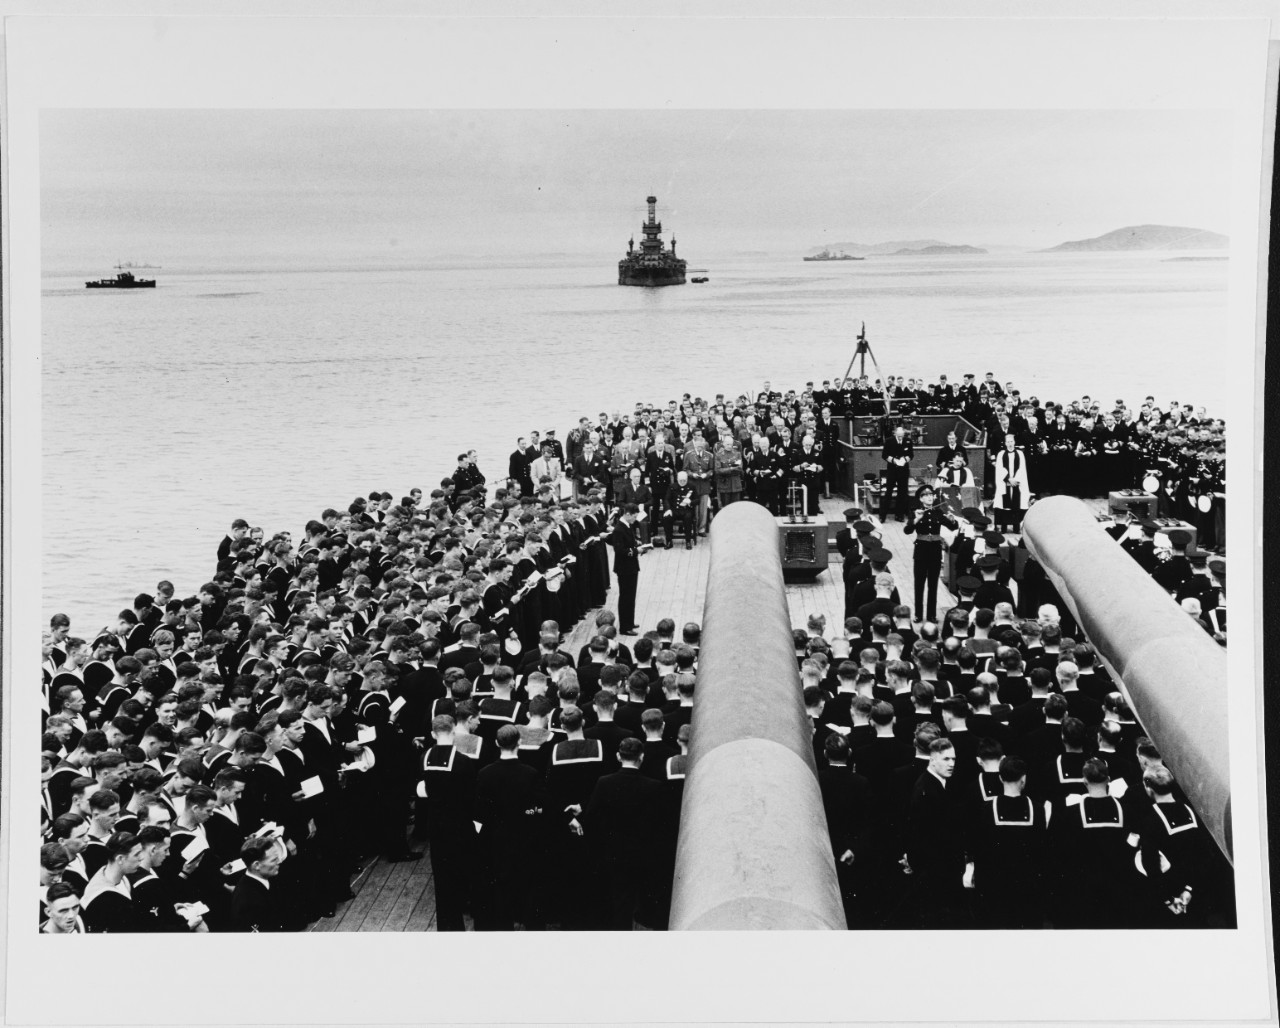 Photo #: NH 67208  Atlantic Charter Conference, 10-12 August 1941